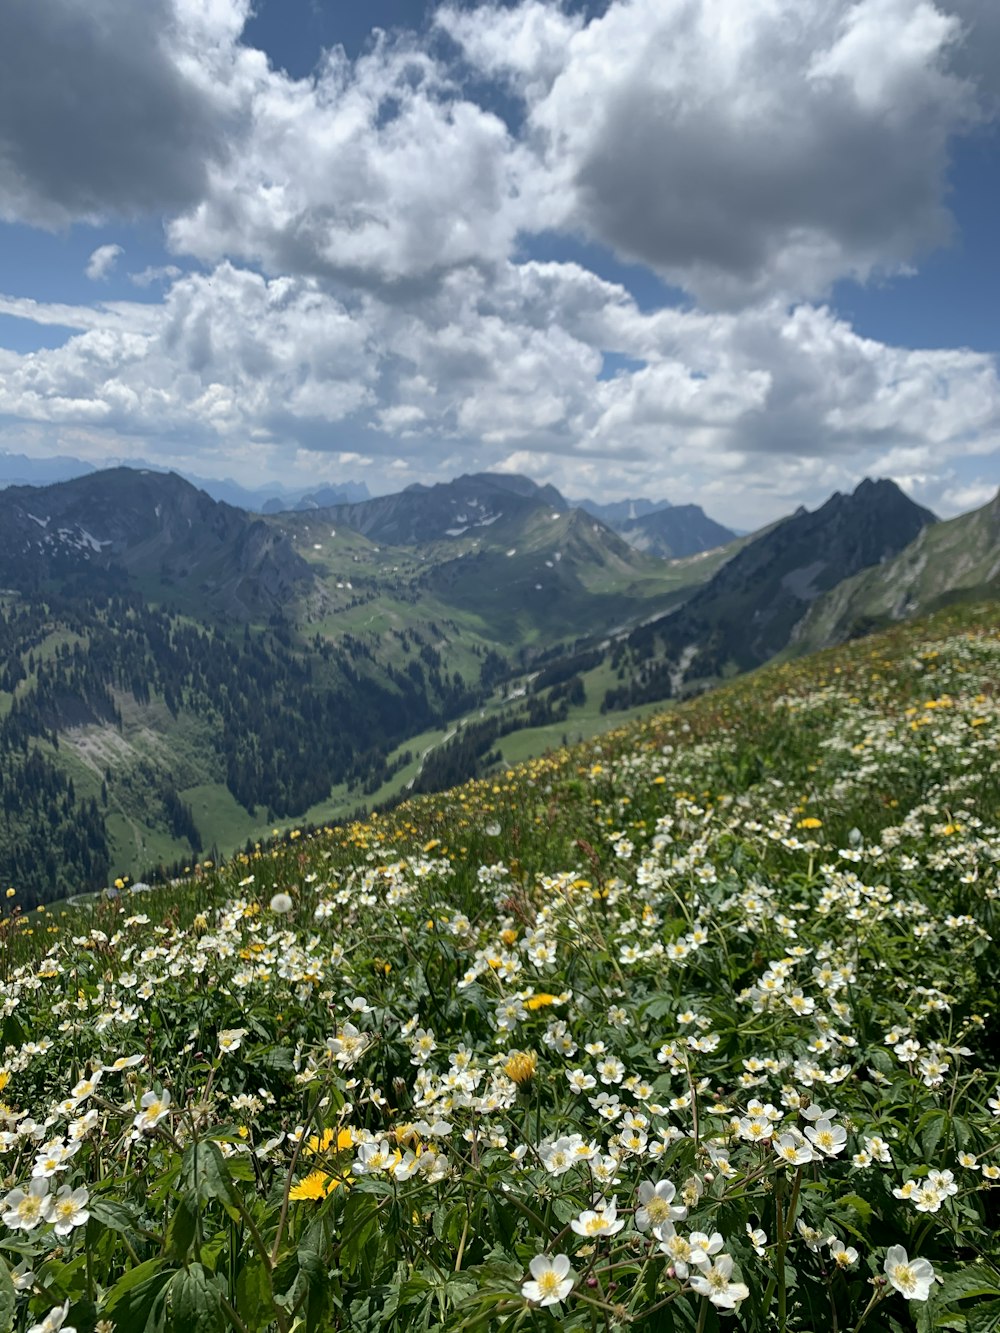 white and yellow flowers on green grass field near mountains under white clouds and blue sky